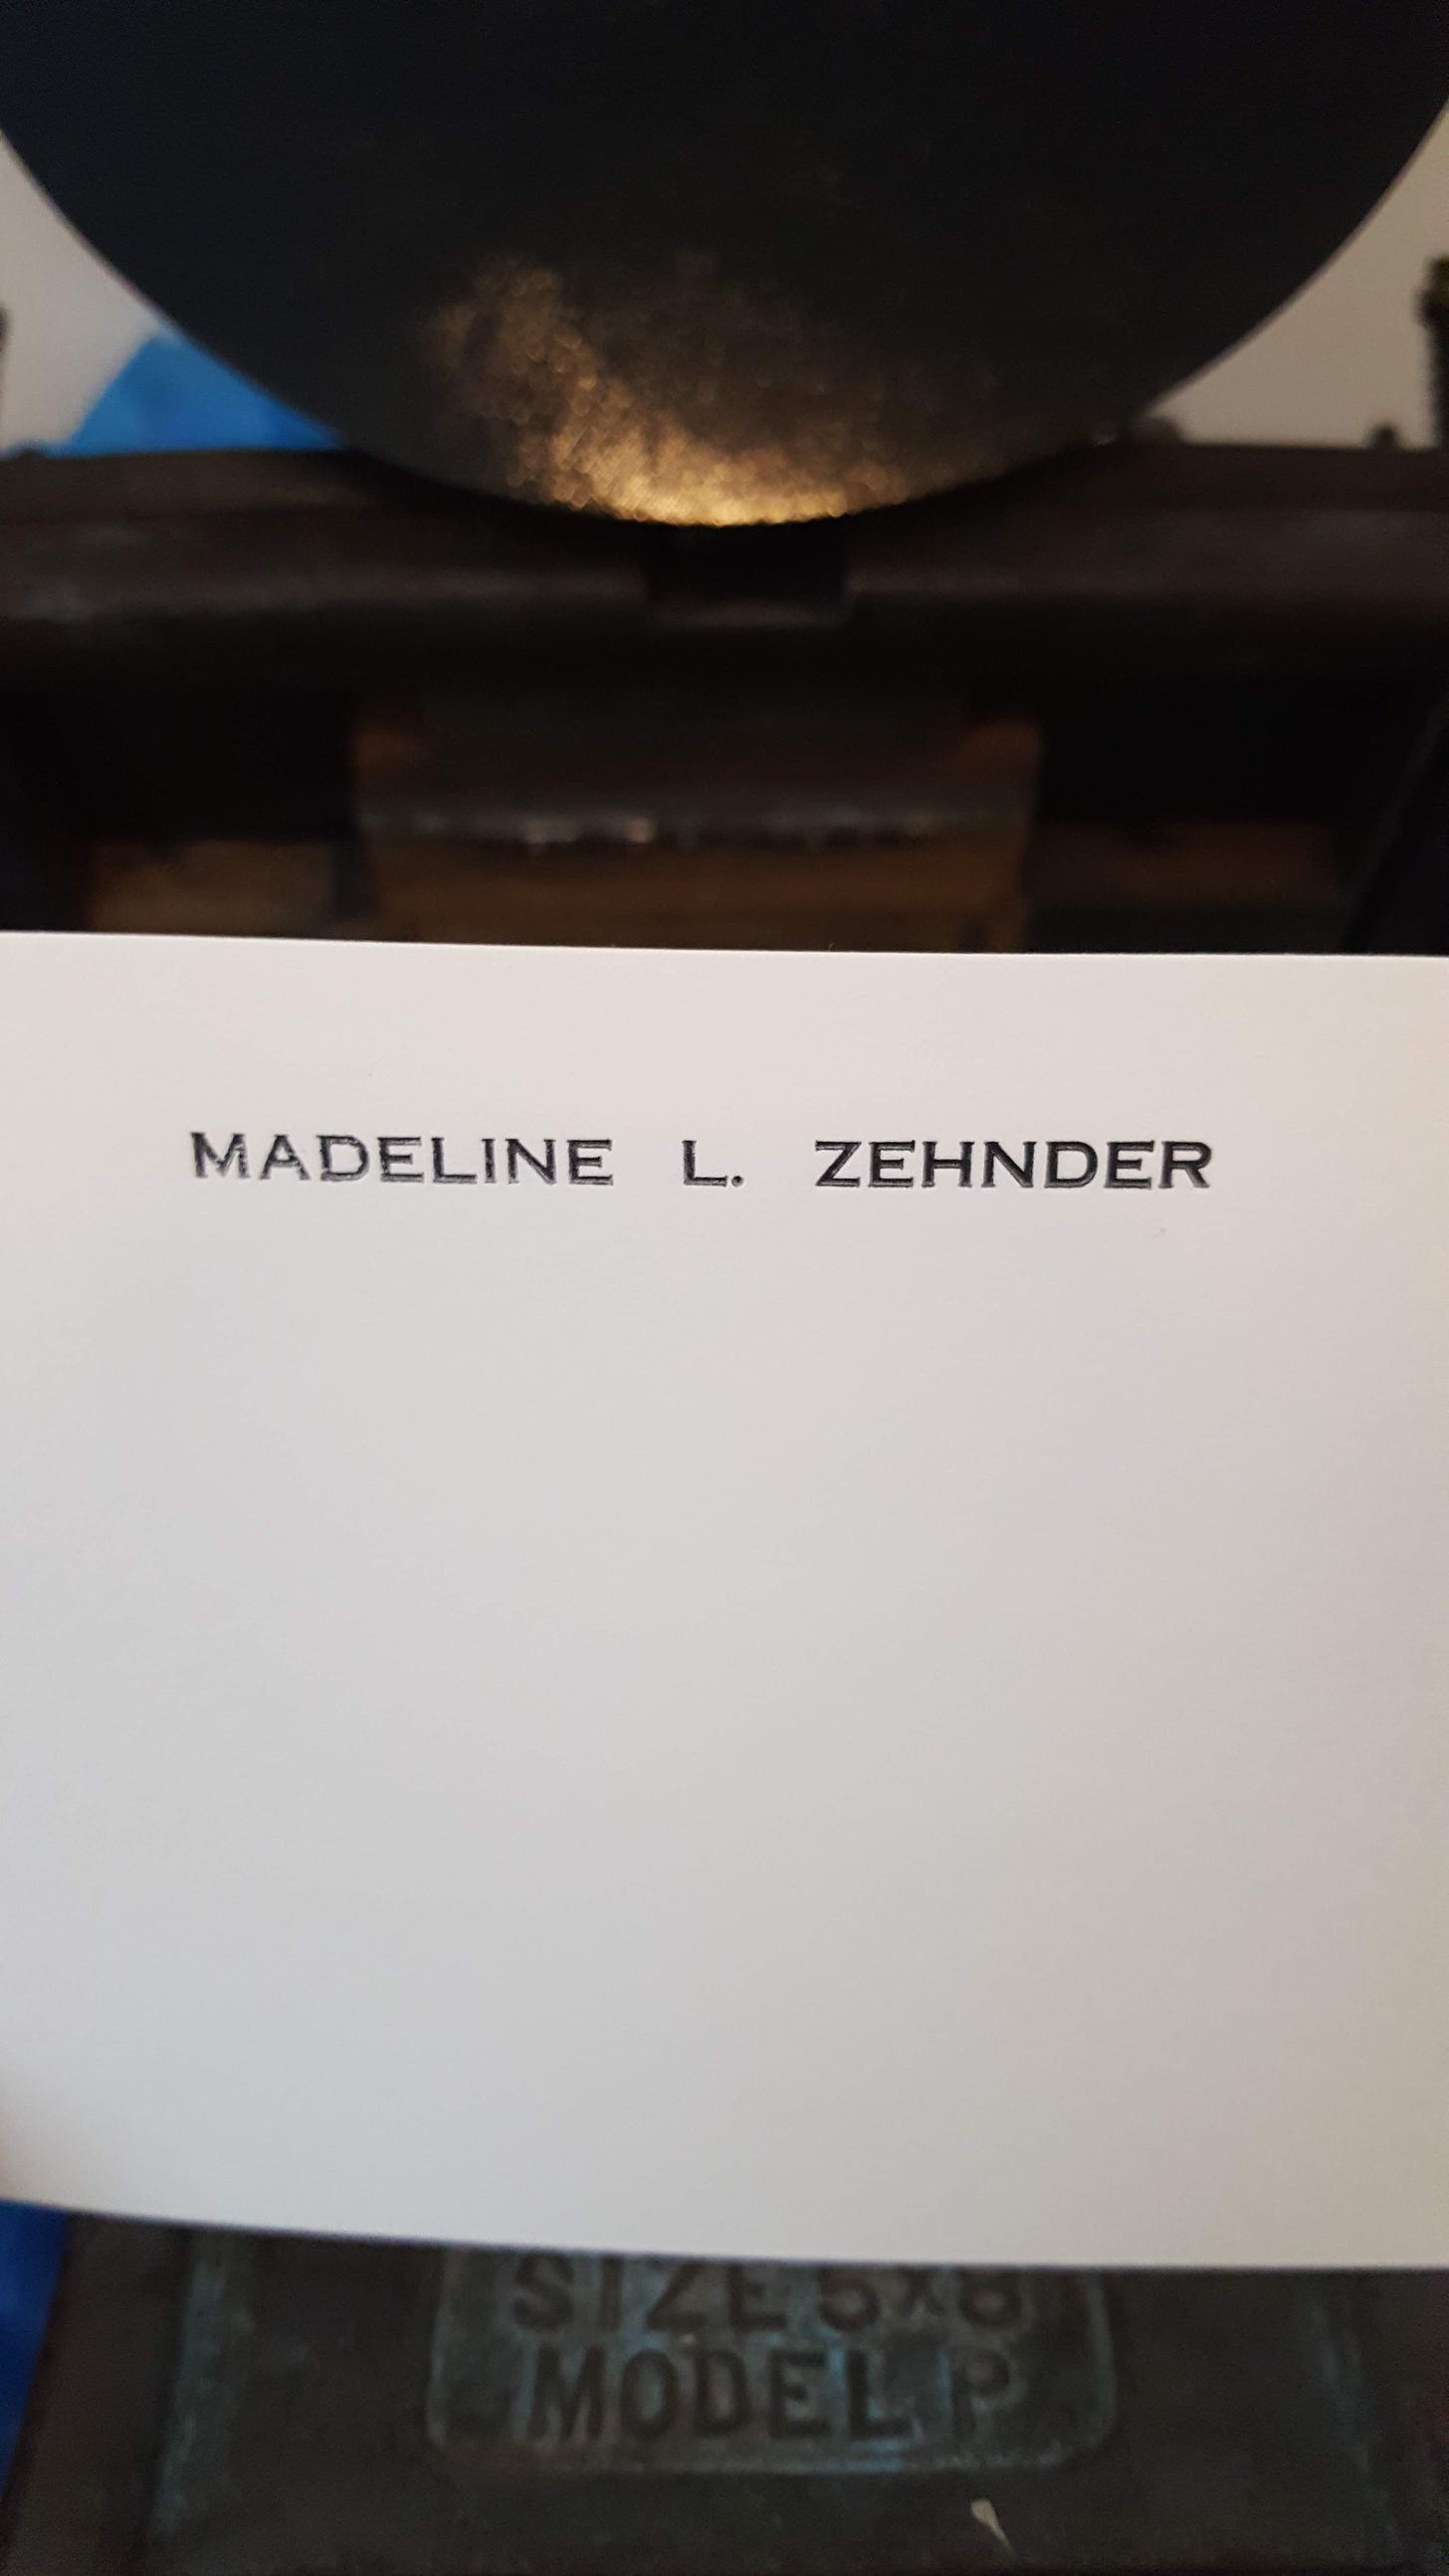 Printed card that reads "MADELINE L. ZEHNDER" in black type on white paper